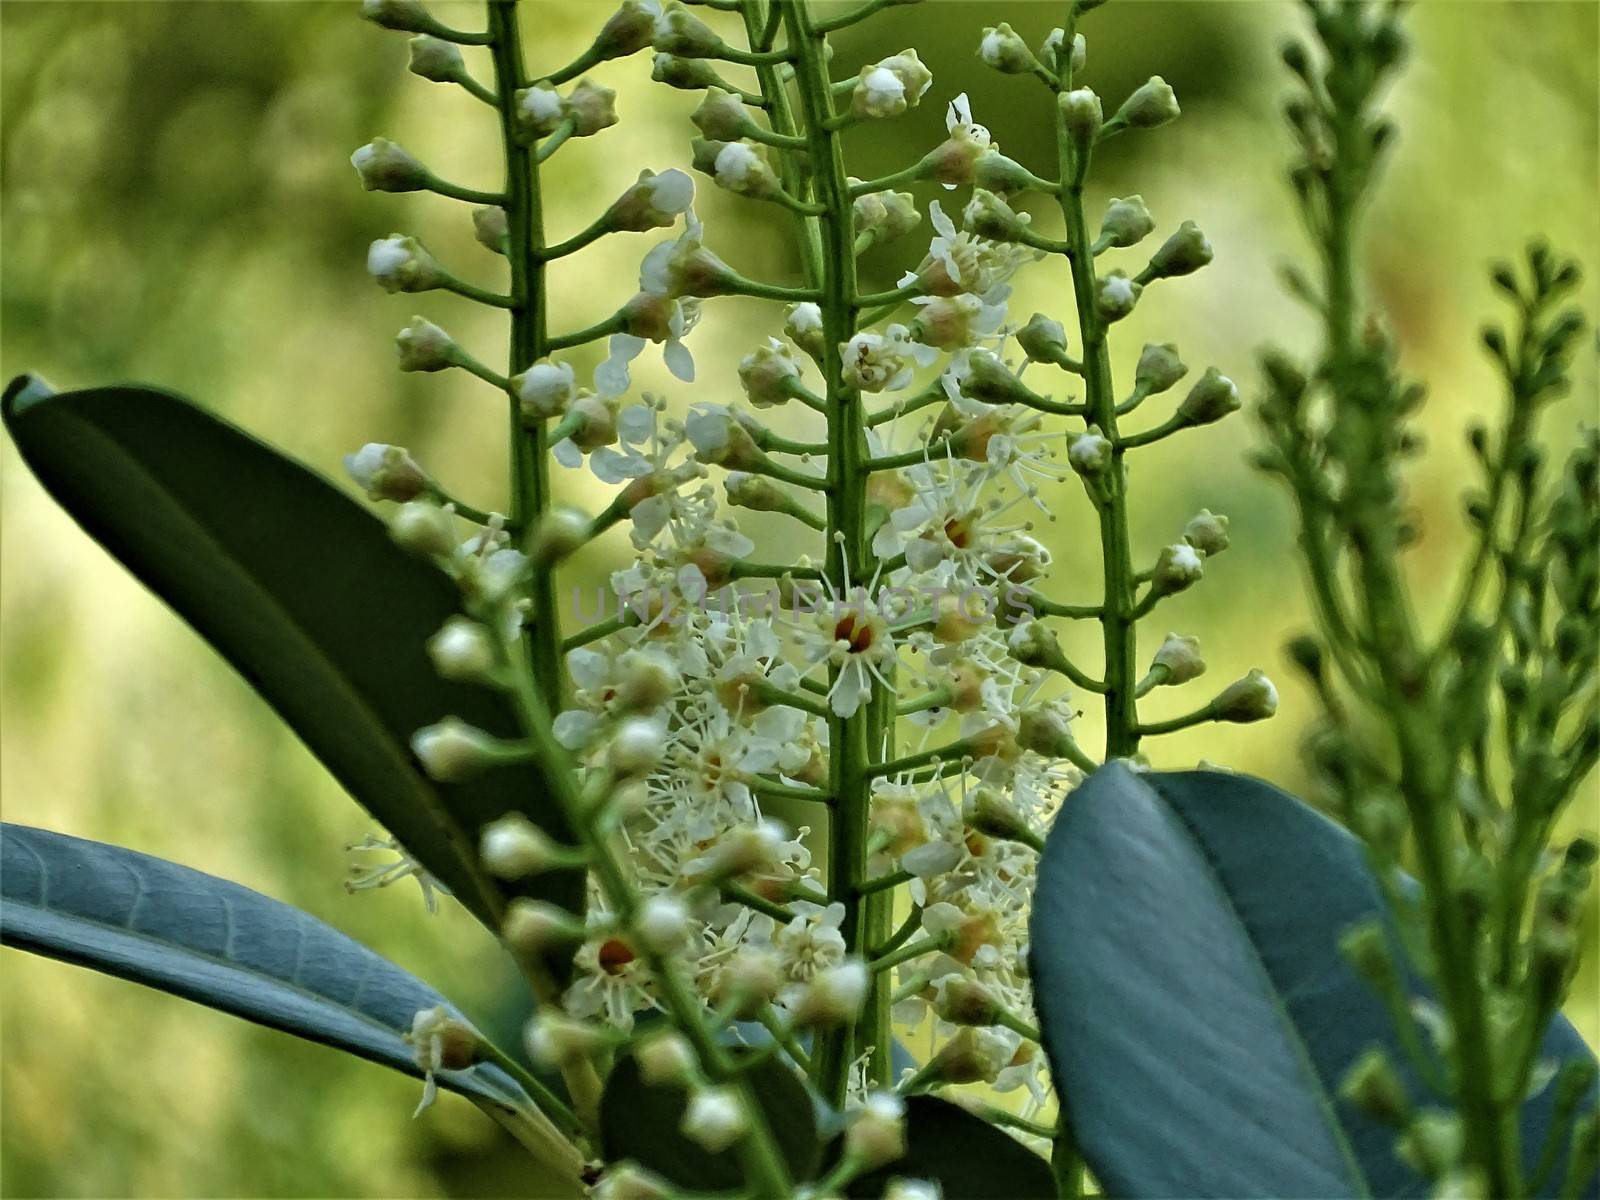 Close-up of a white and yellow cherry laurel blossom